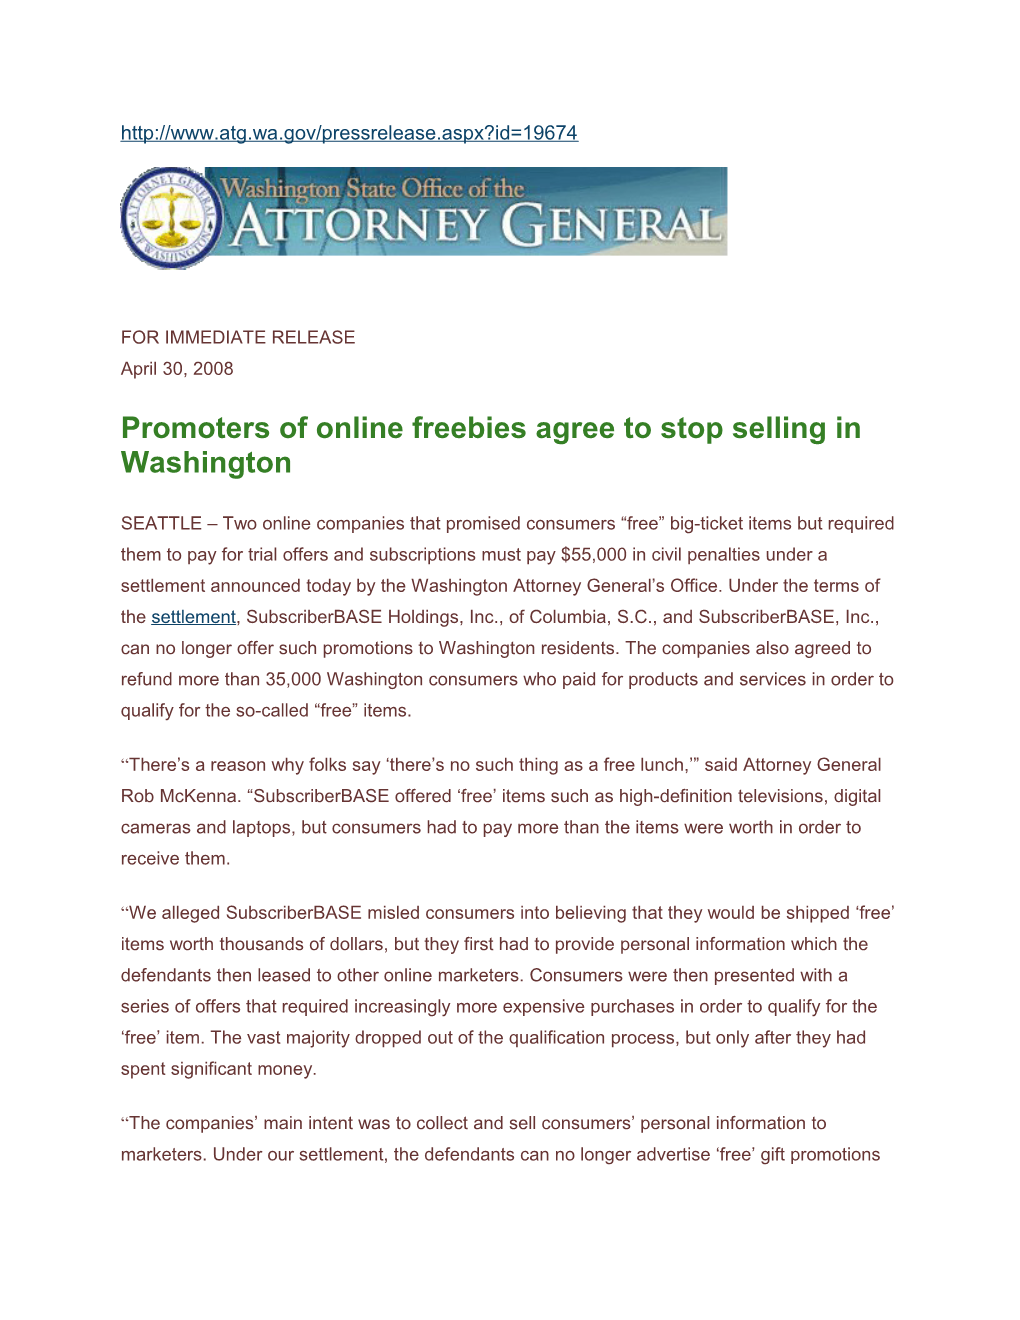 Promoters of Online Freebies Agree to Stop Selling in Washington